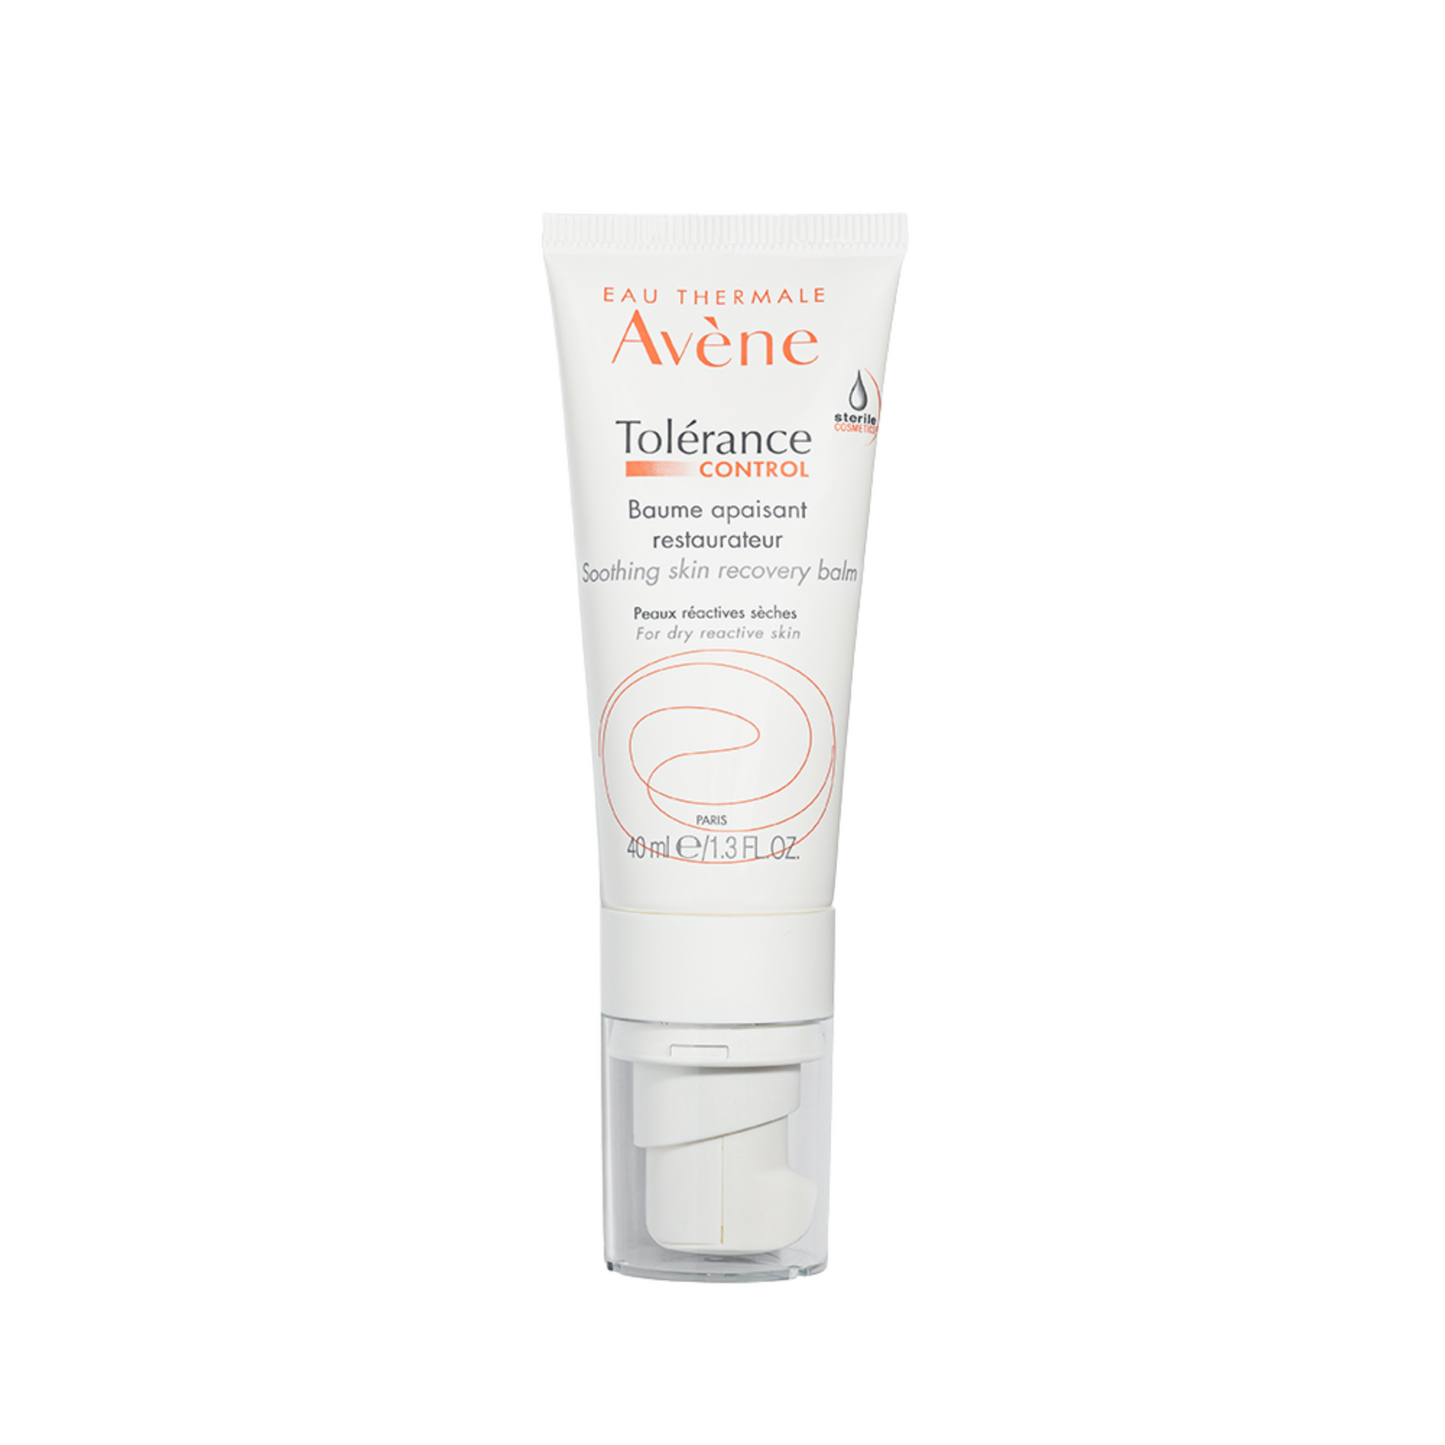 Primary Image of Avene Tolerance Control Soothing Skin Recovery Balm